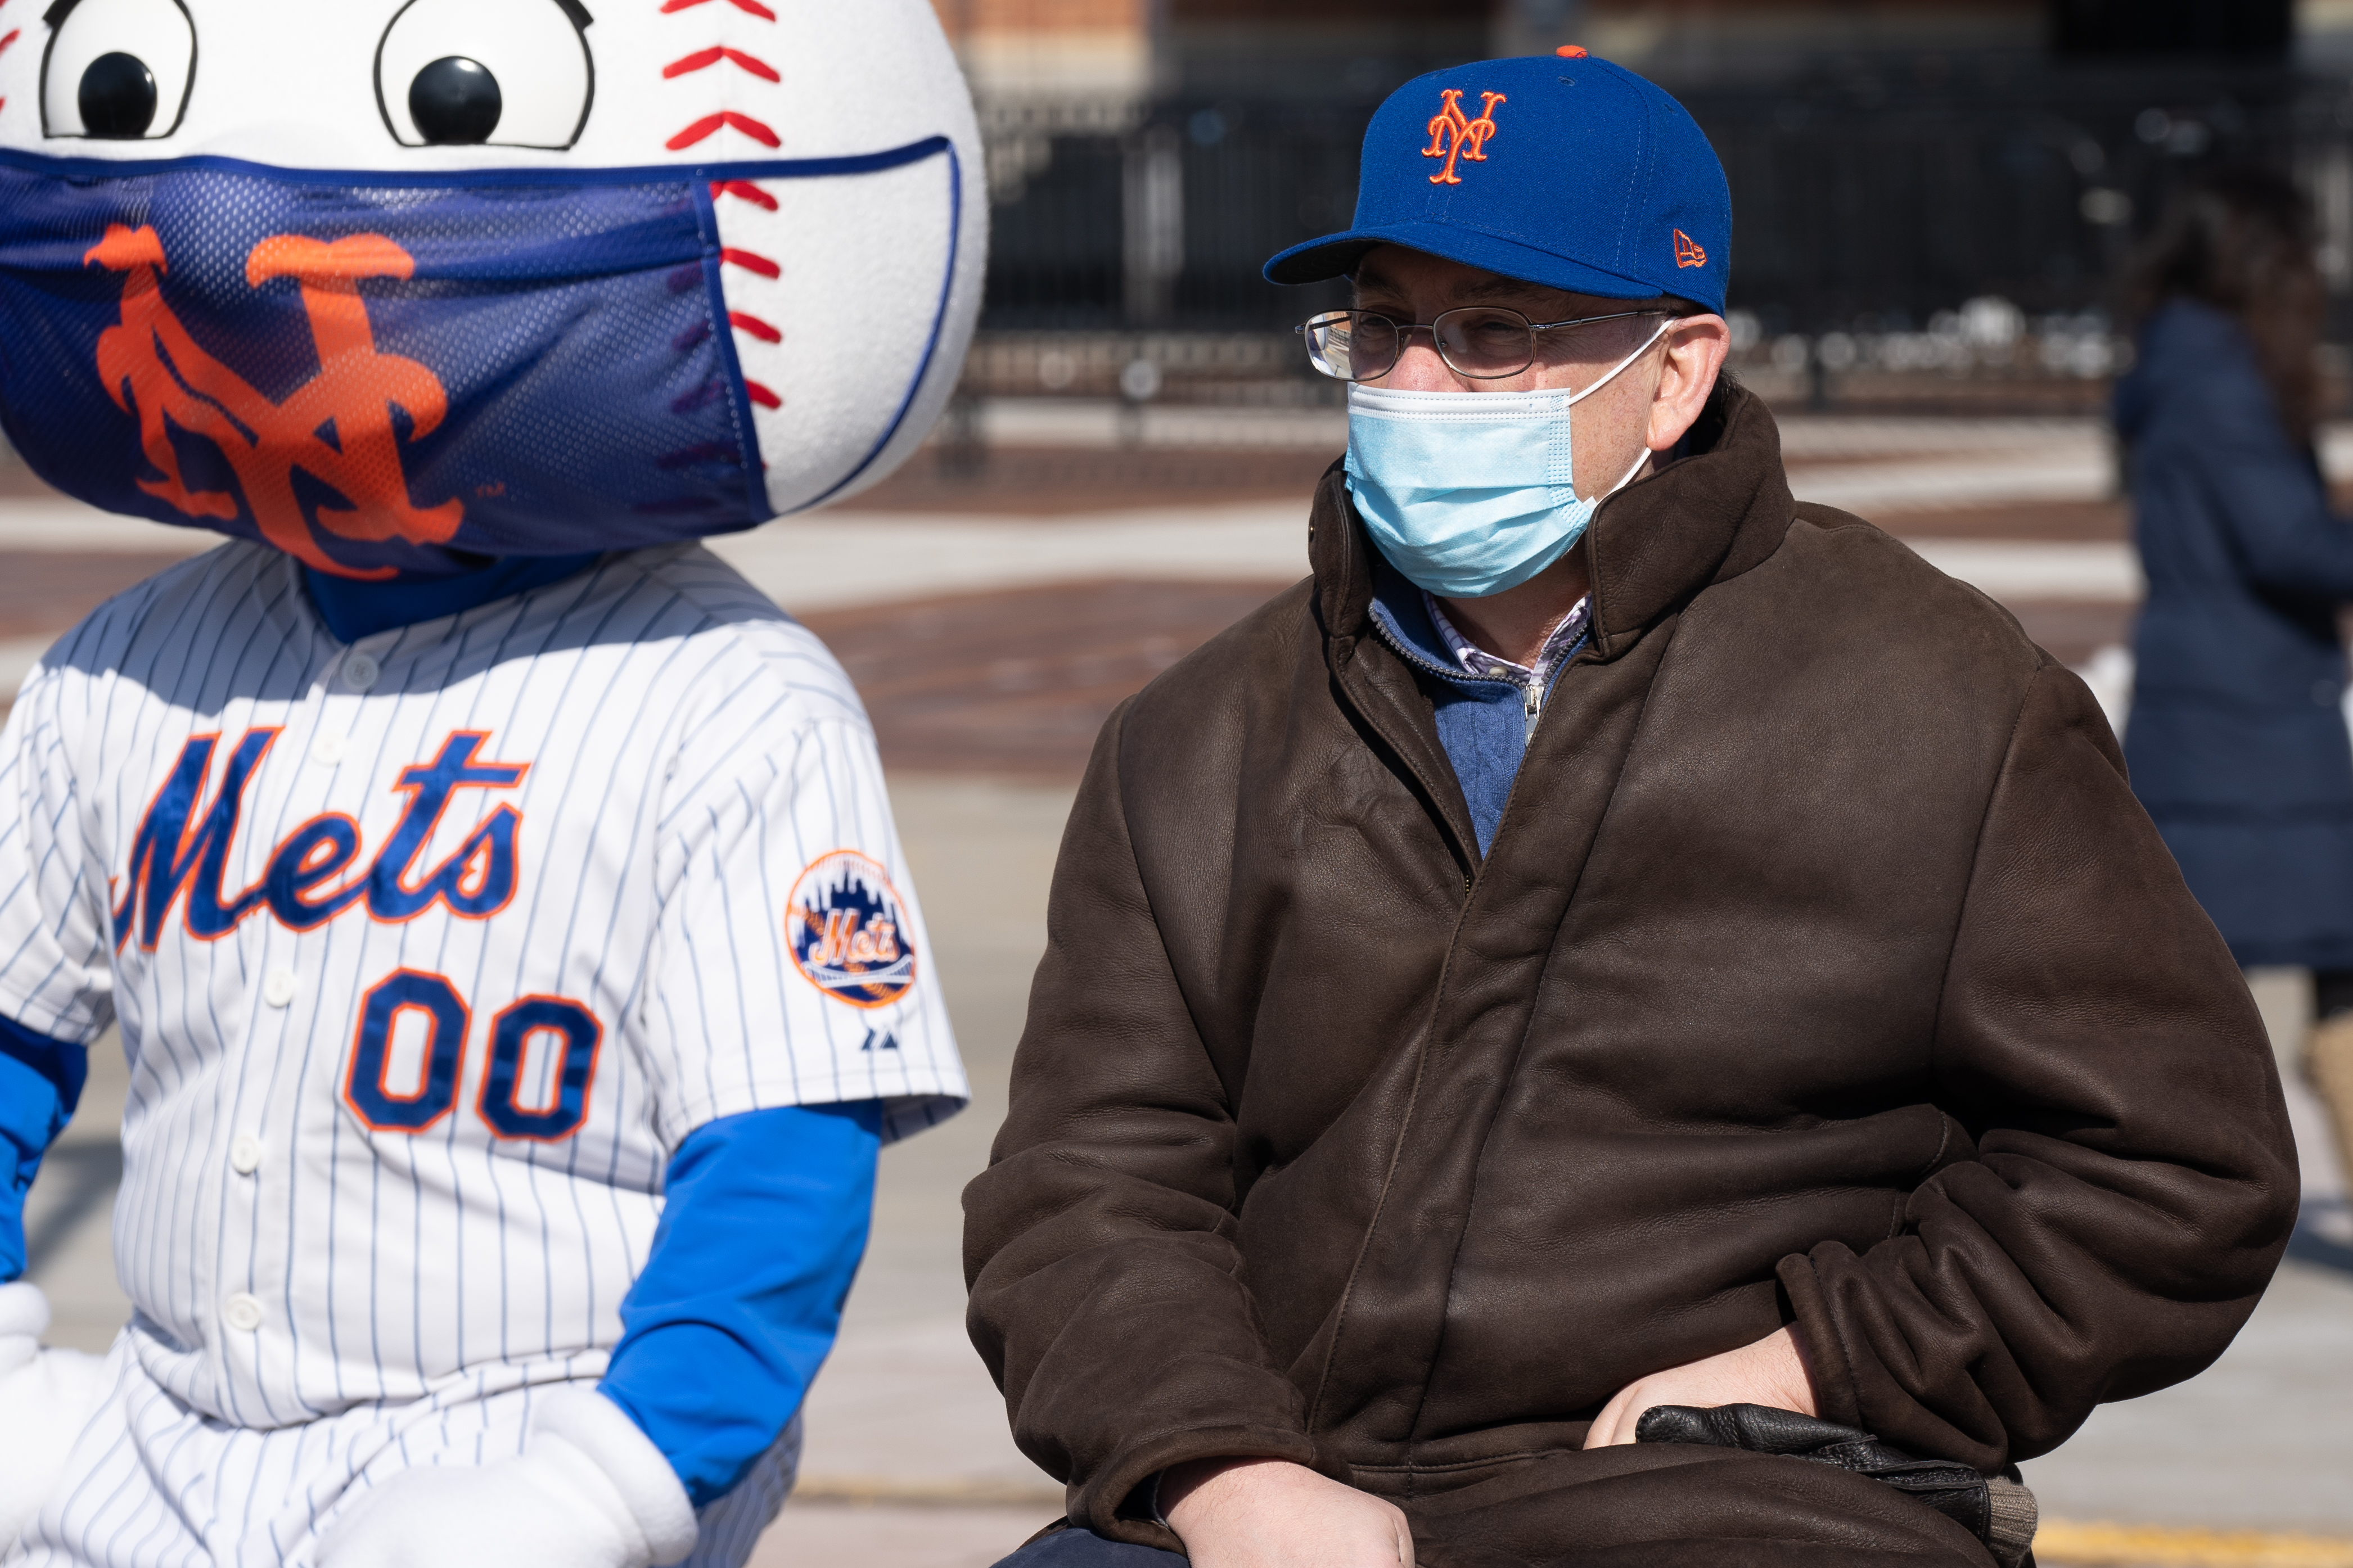 Mass Vaccination Site Opens At Citi Field In New York City